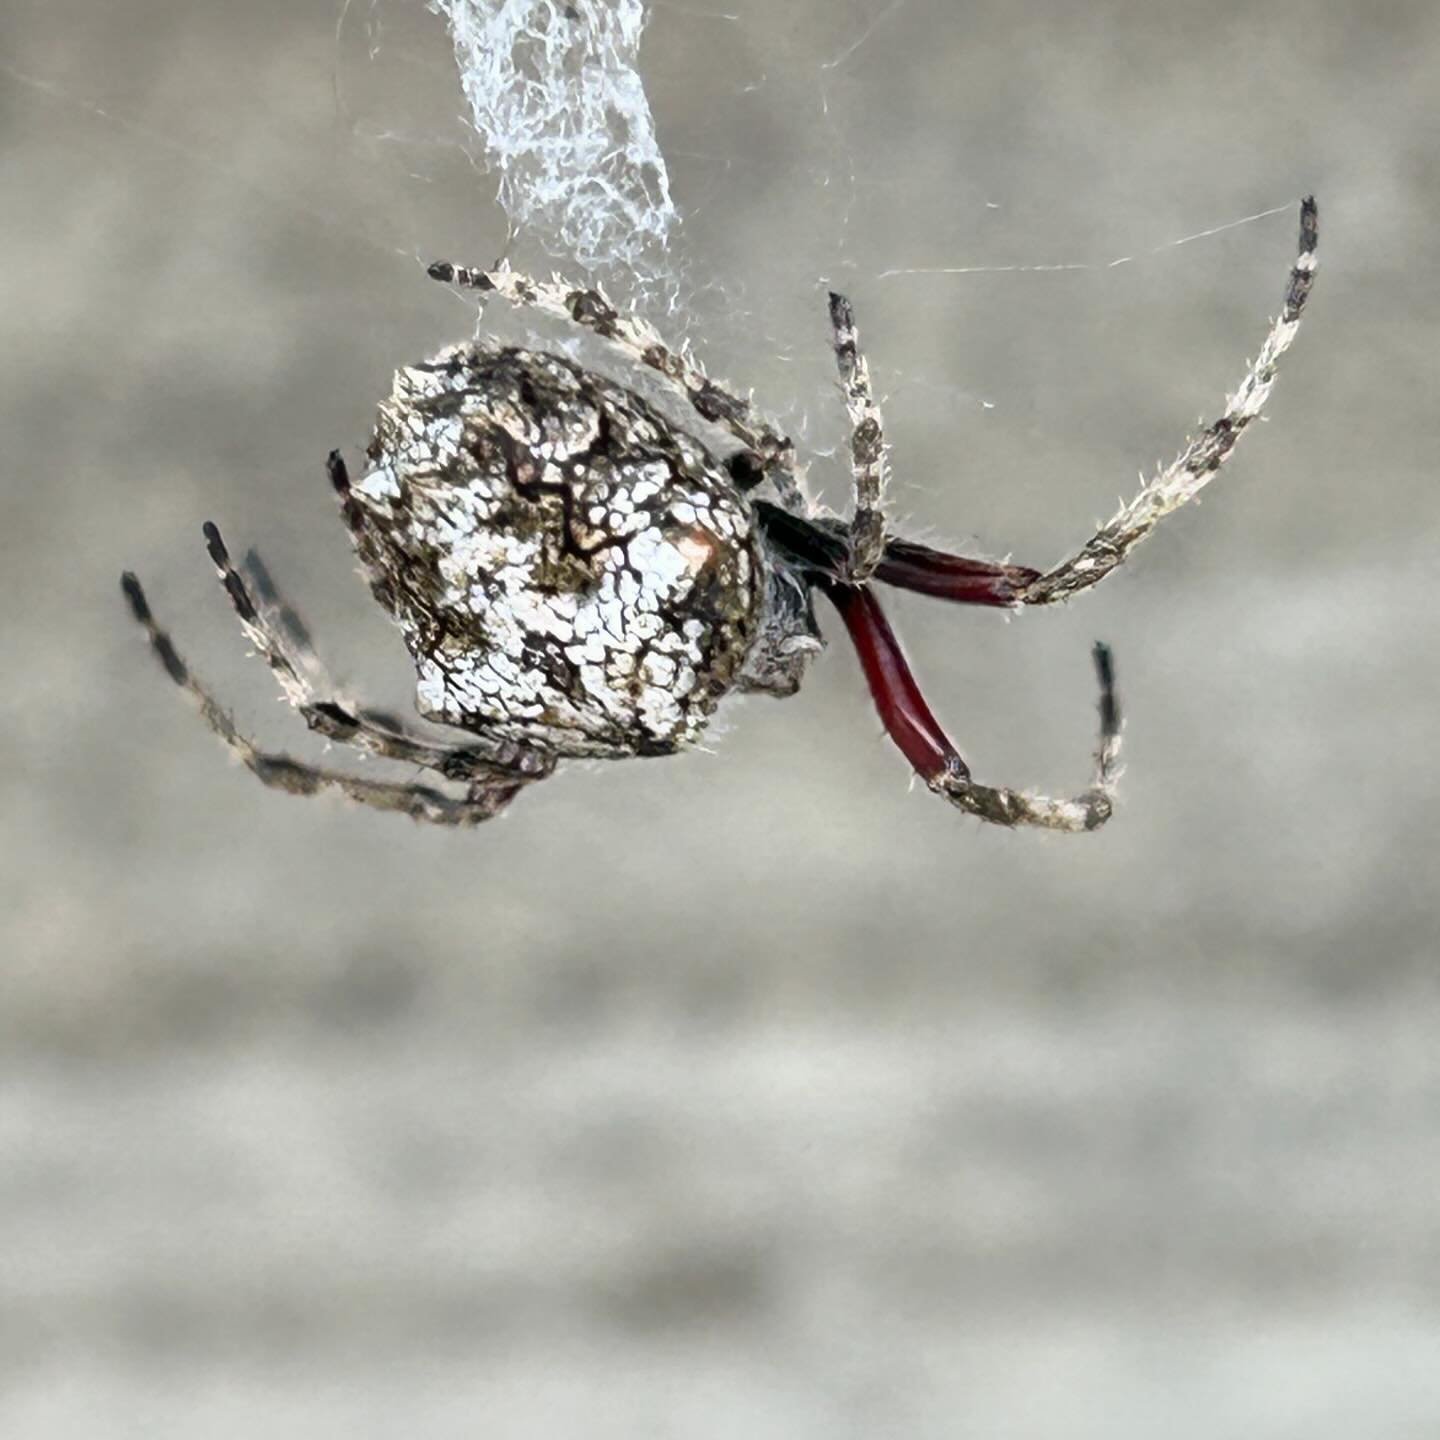 I chanced upon this beautiful knobbled orbweaver on my walk a few days ago. #nzspiders #naturewalk